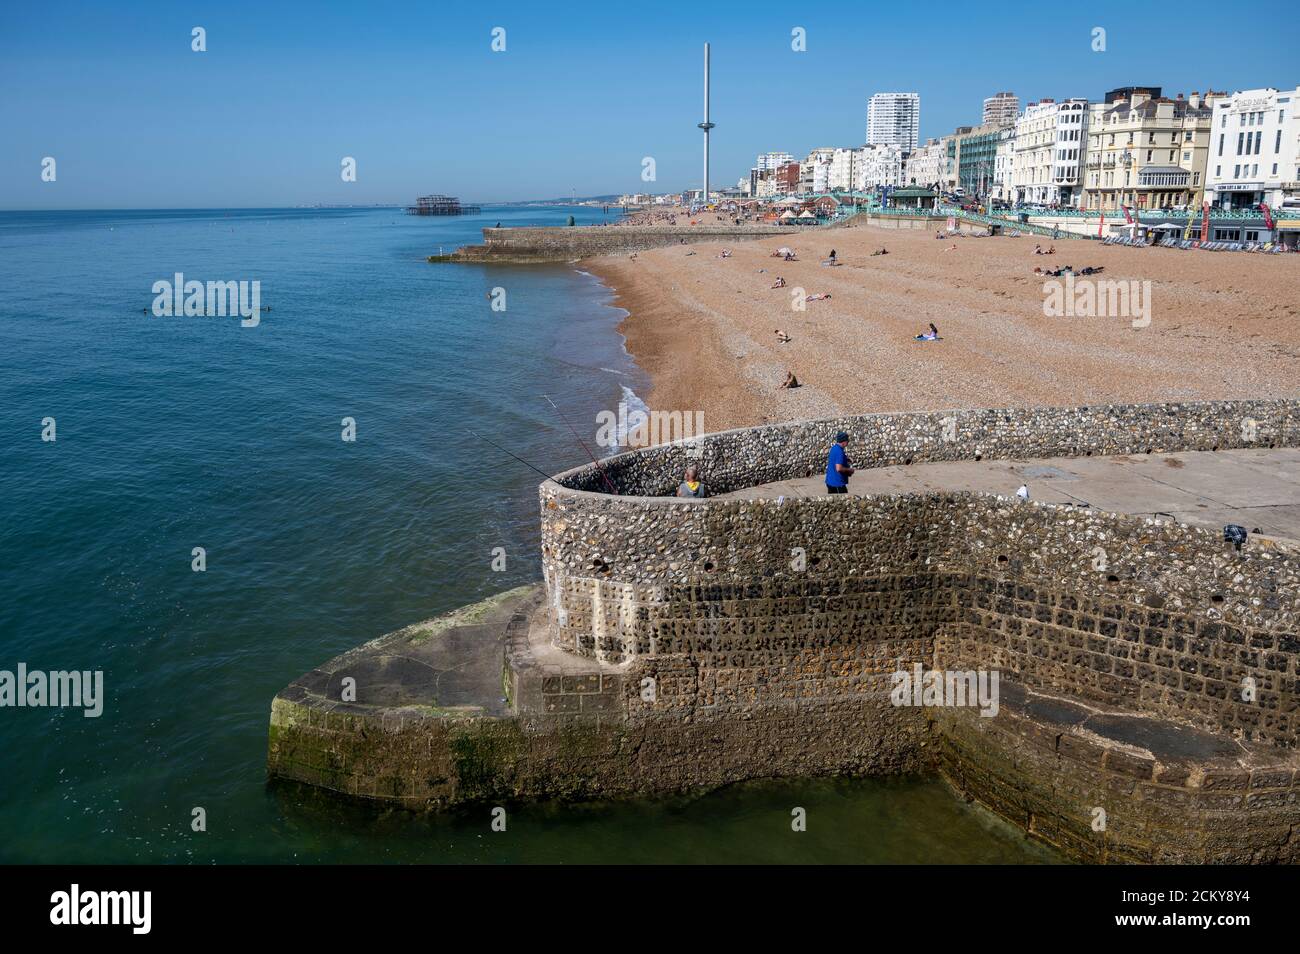 Brighton beach with a groyne popular for fishing and the beach and seafront also in view. Stock Photo